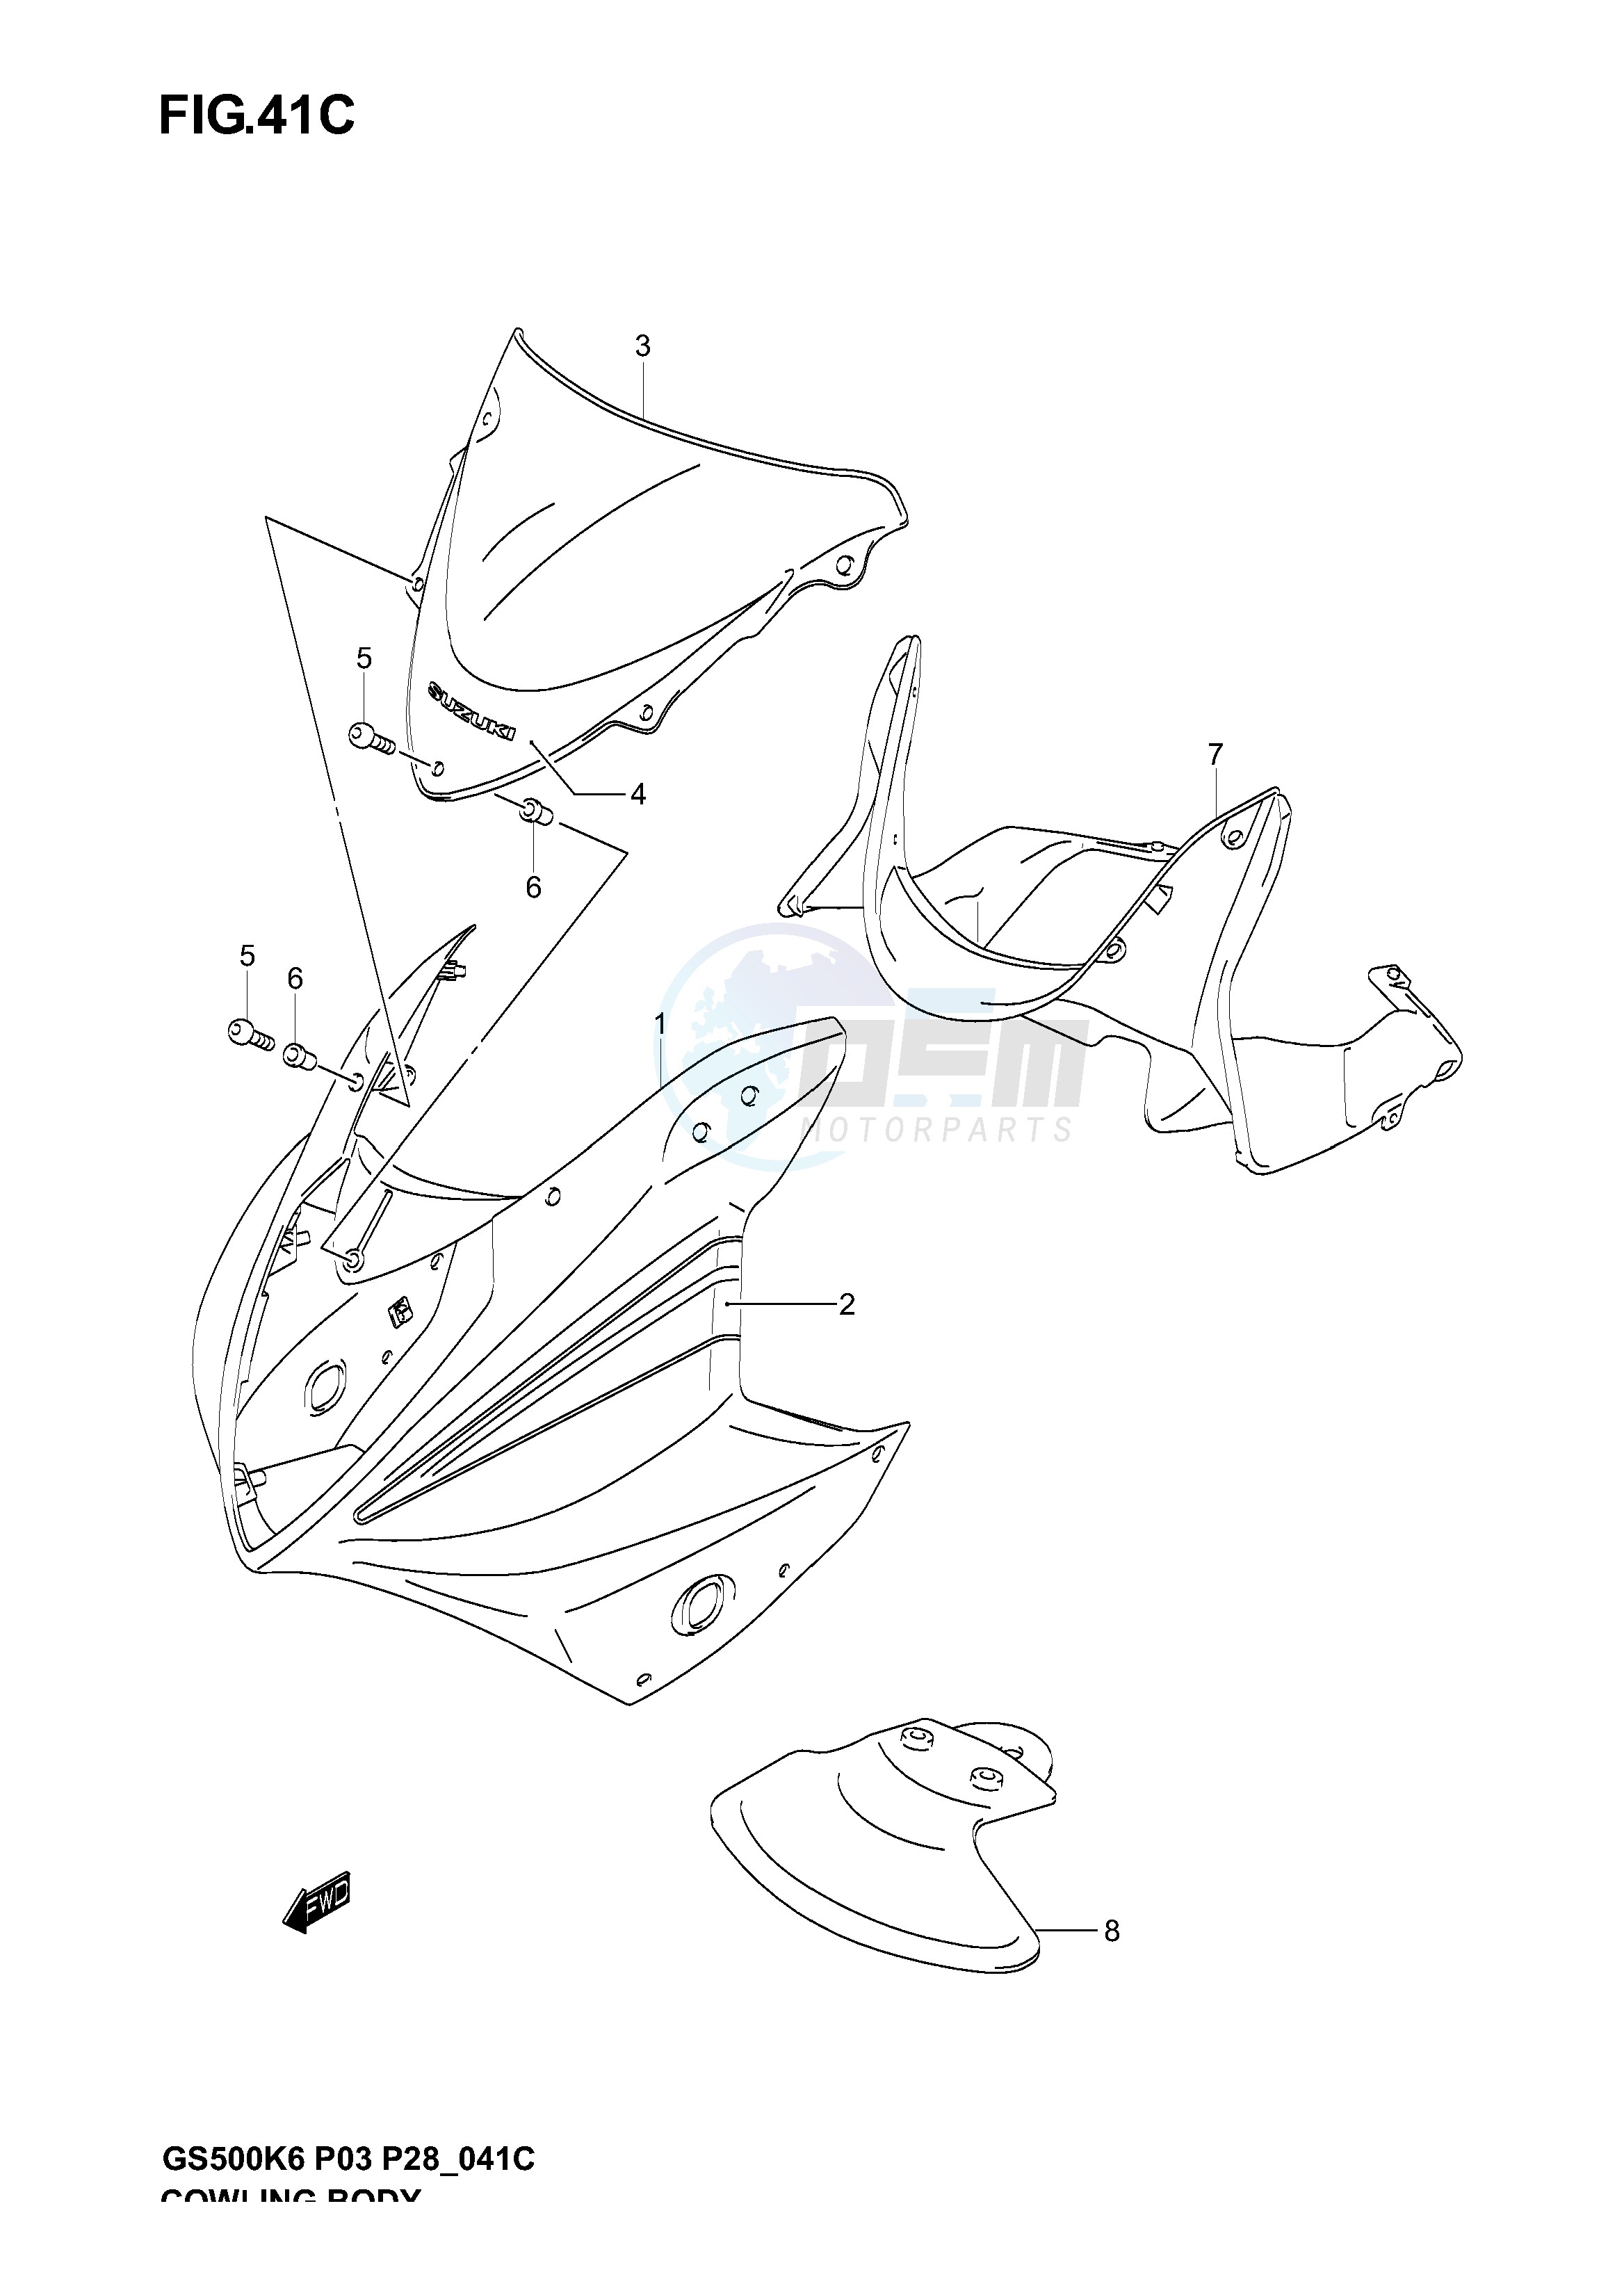 COWLING BODY (GS500FK6) image